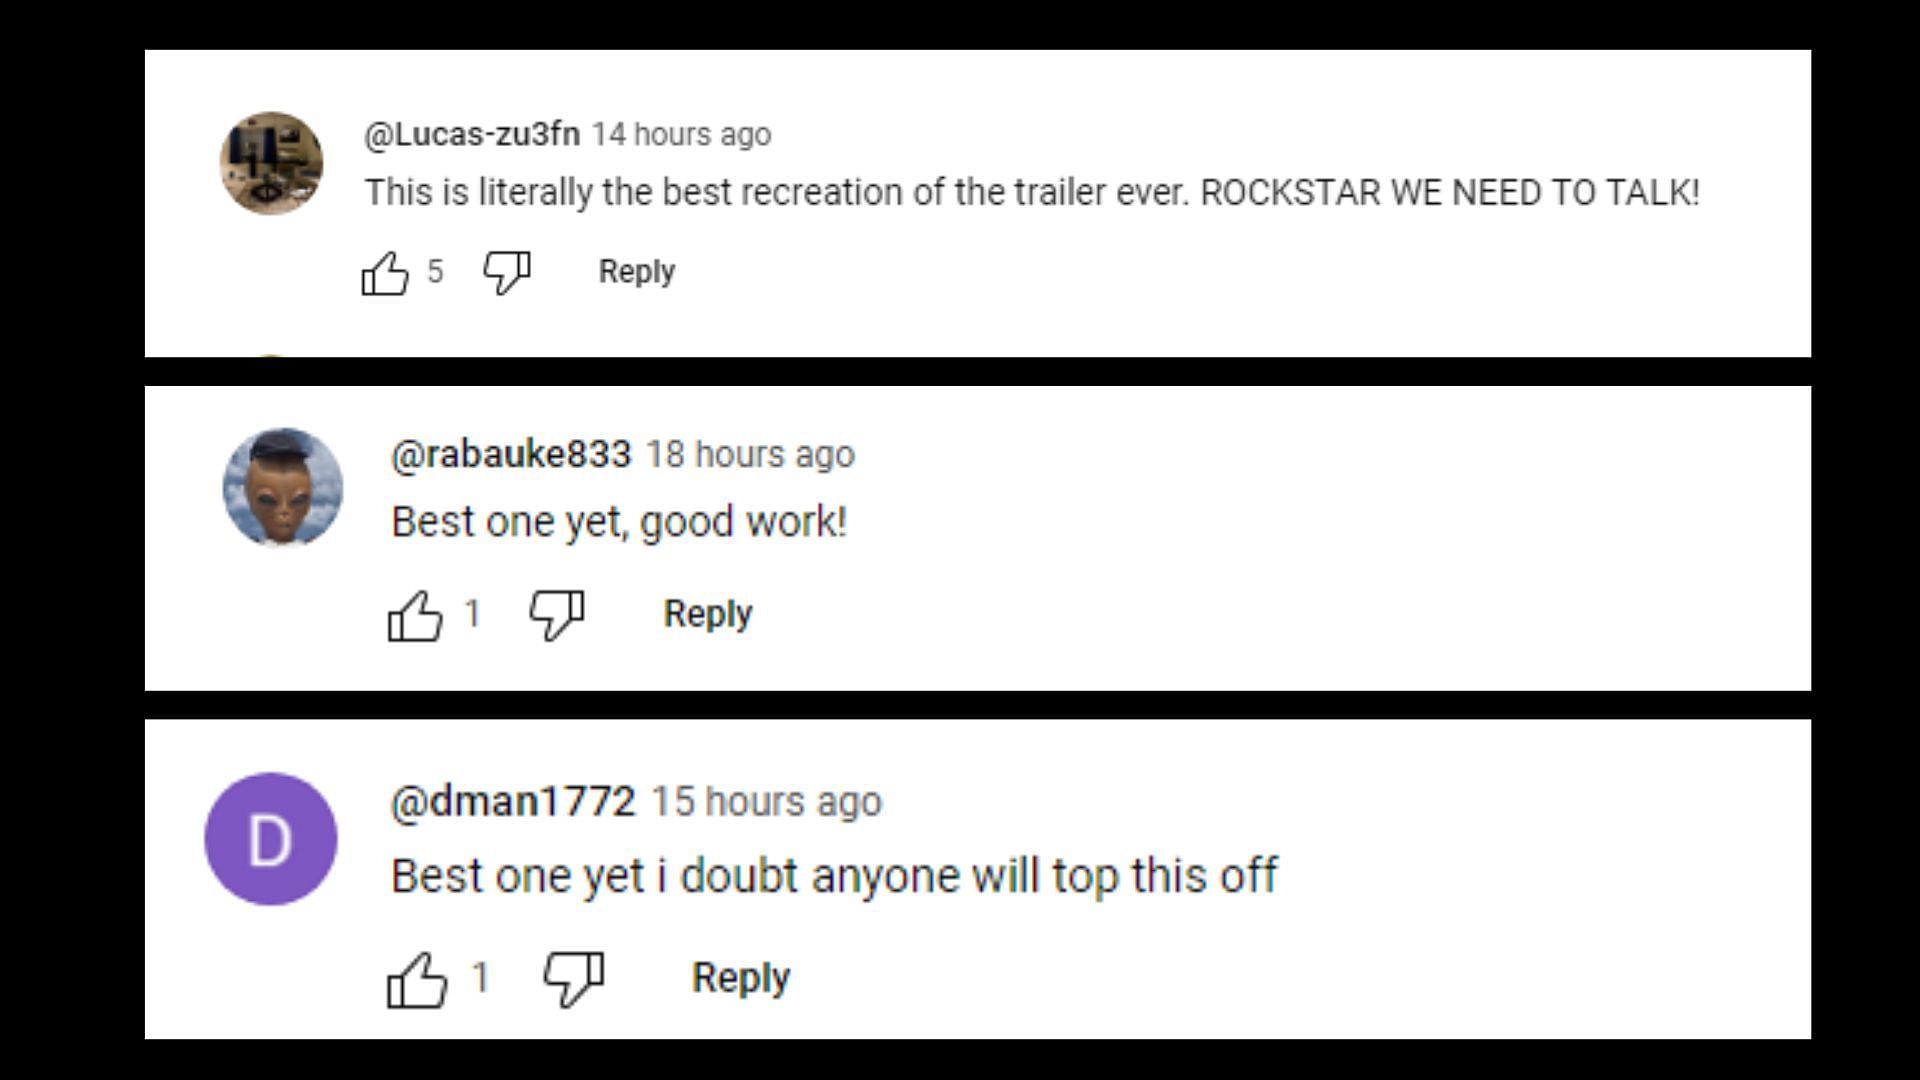 Some fan reactions on the trailer recreation video 2/2 (Images via YouTube)